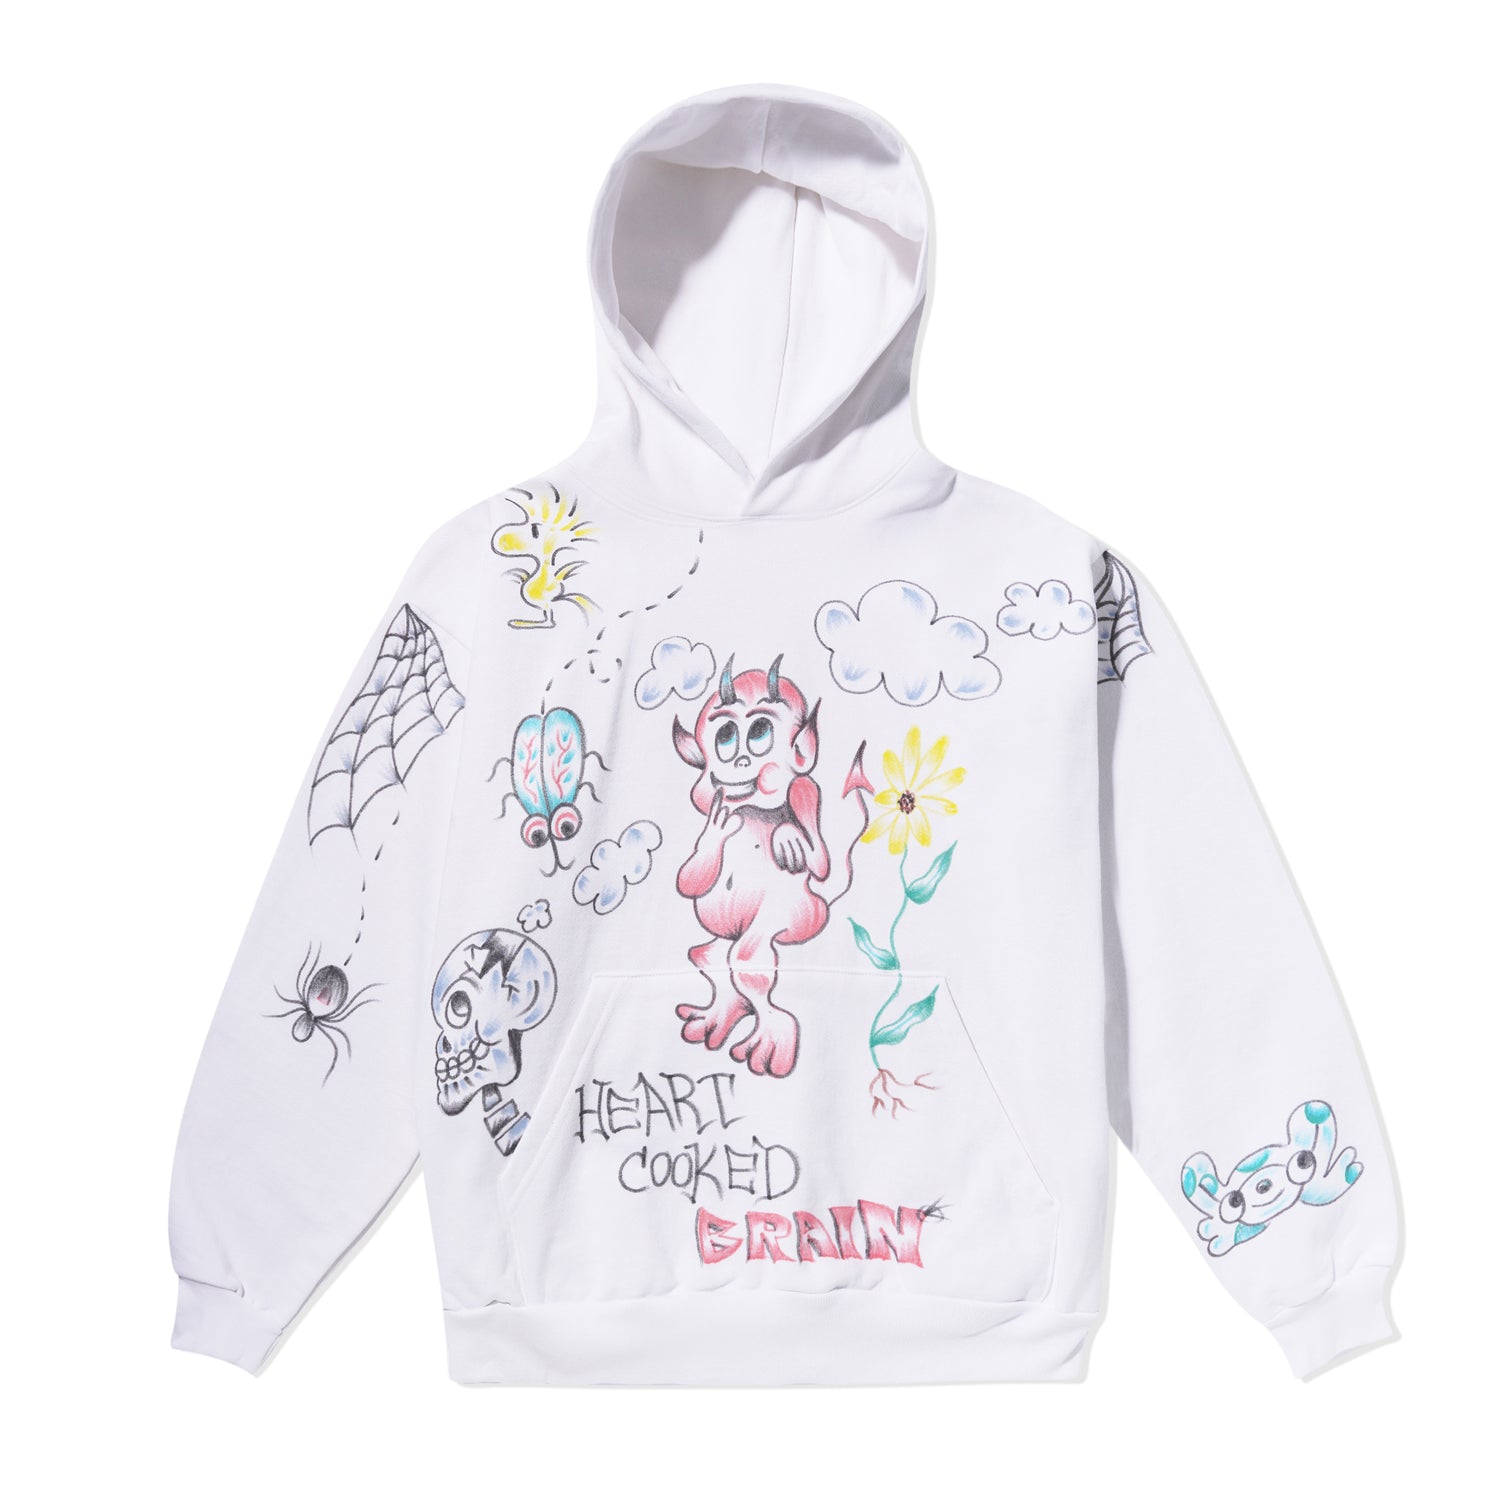 Heart Cooked Brain Pullover, White